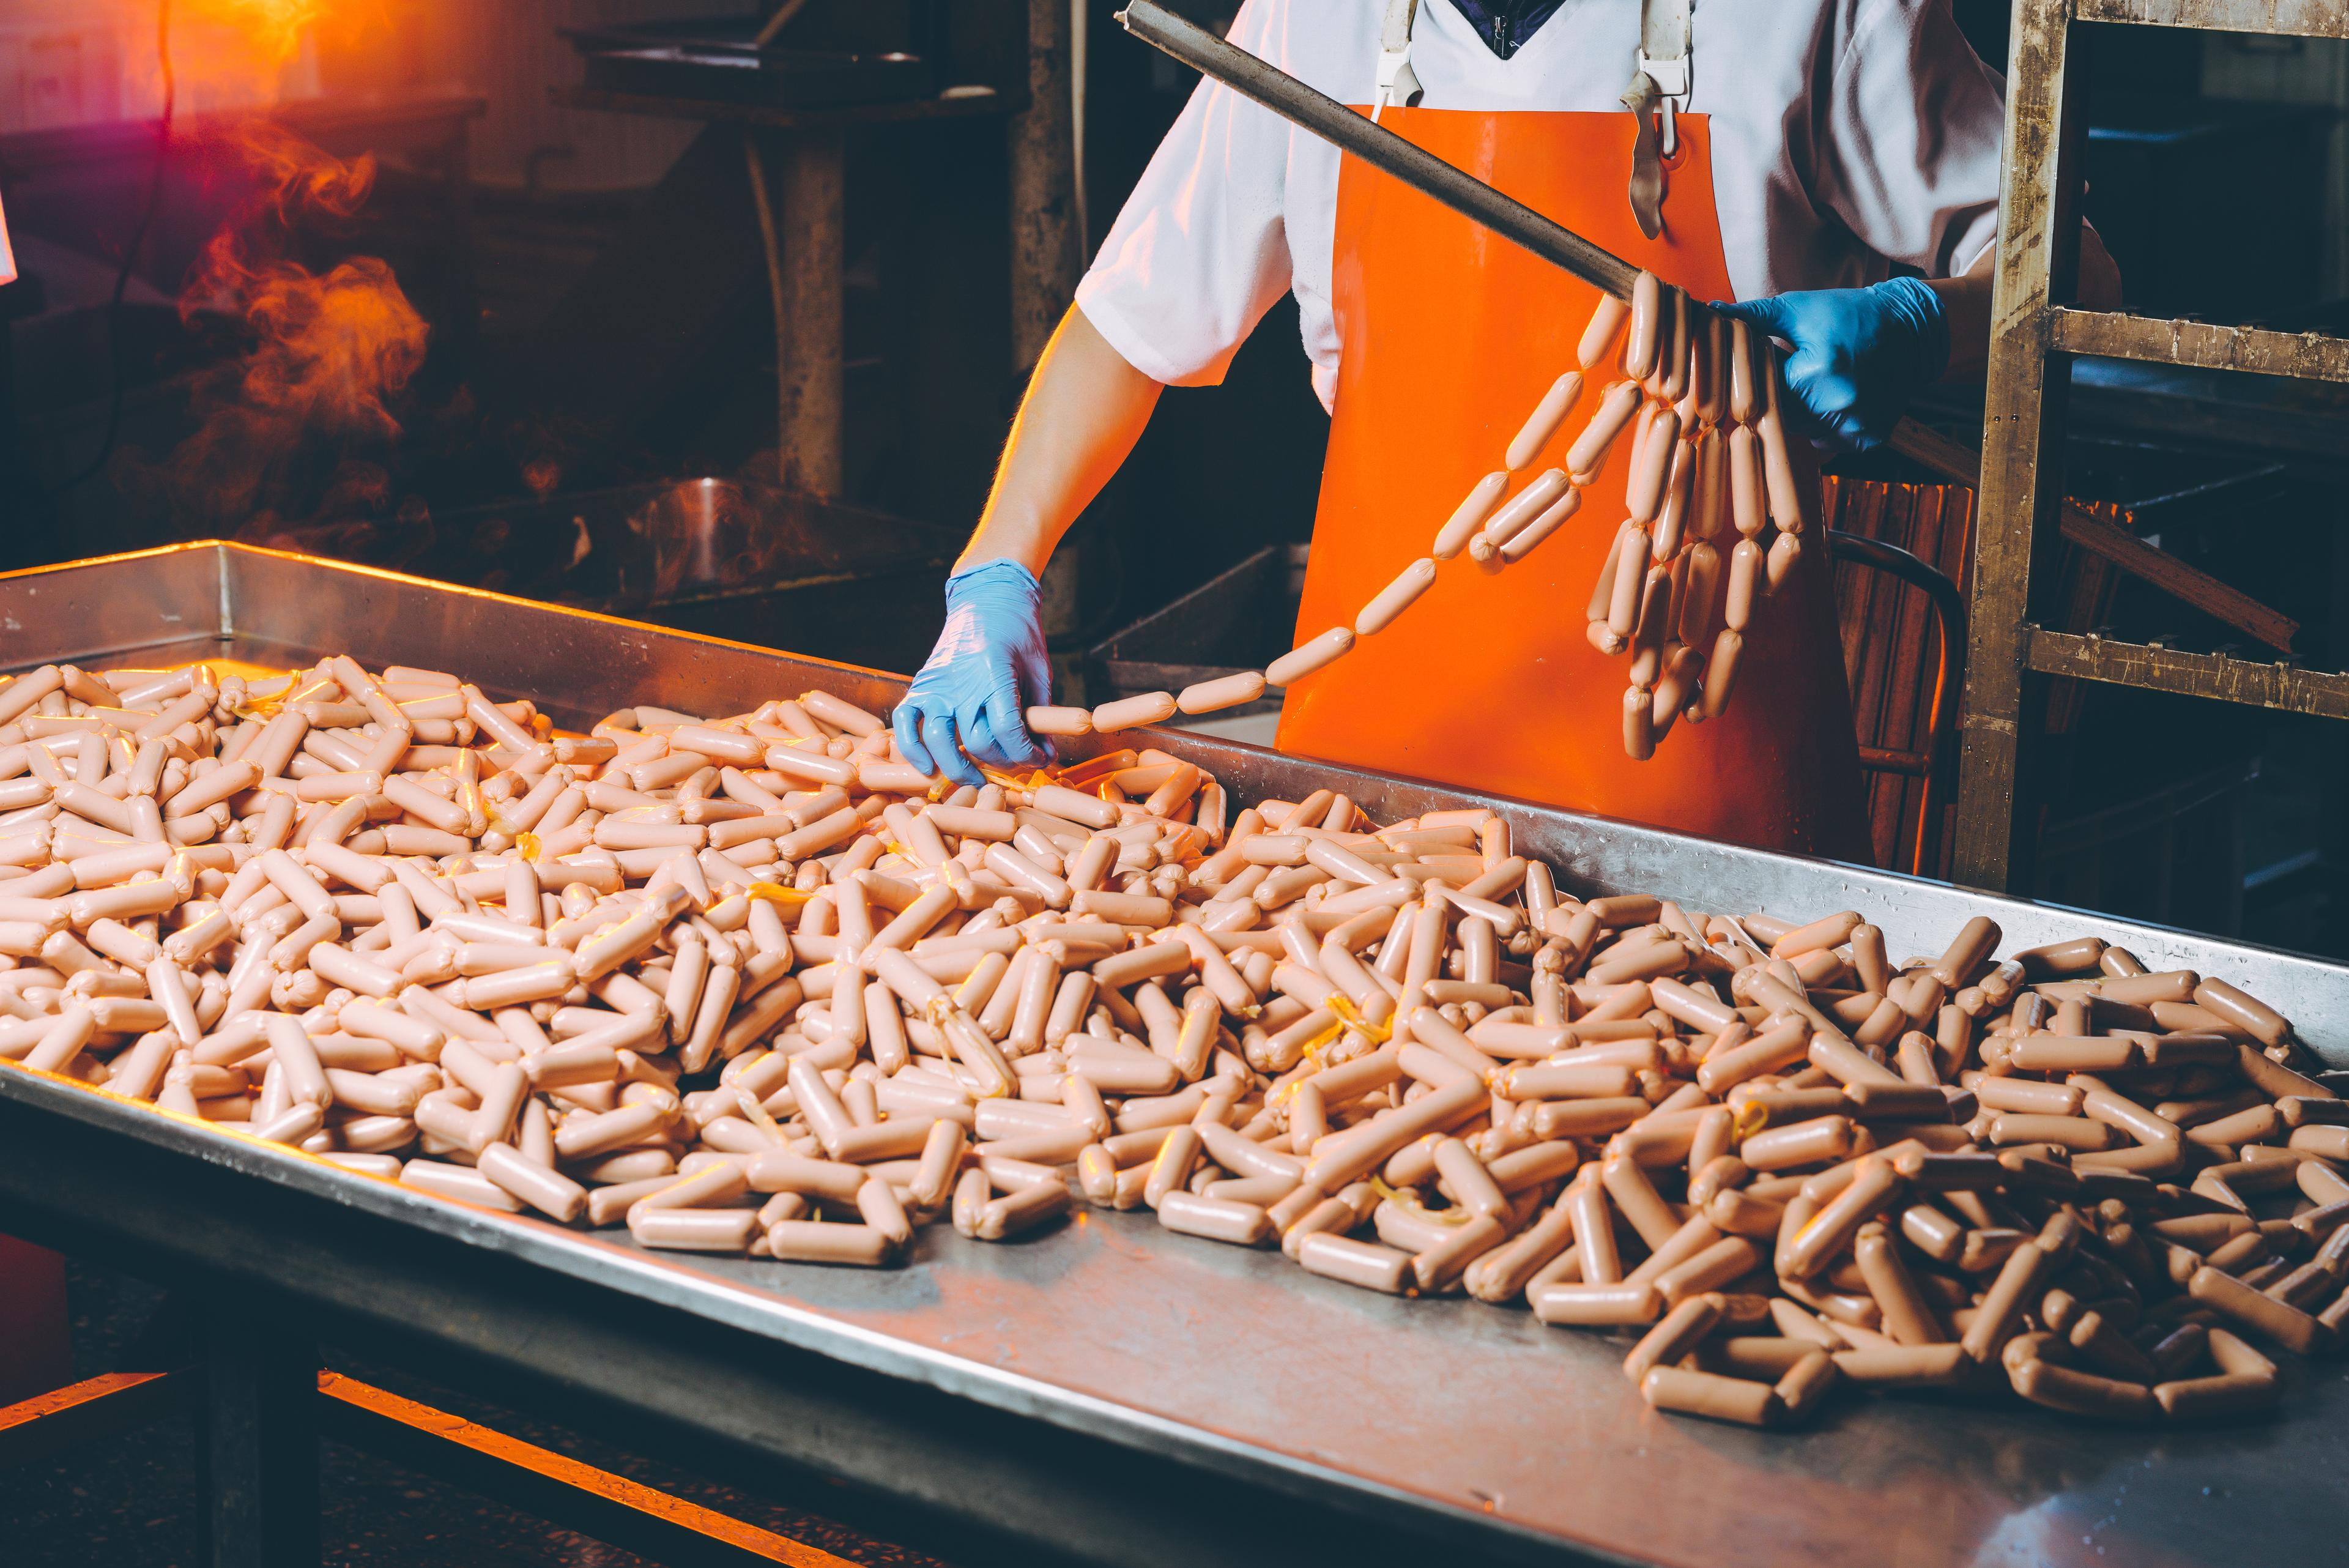 Hot dogs in a factory